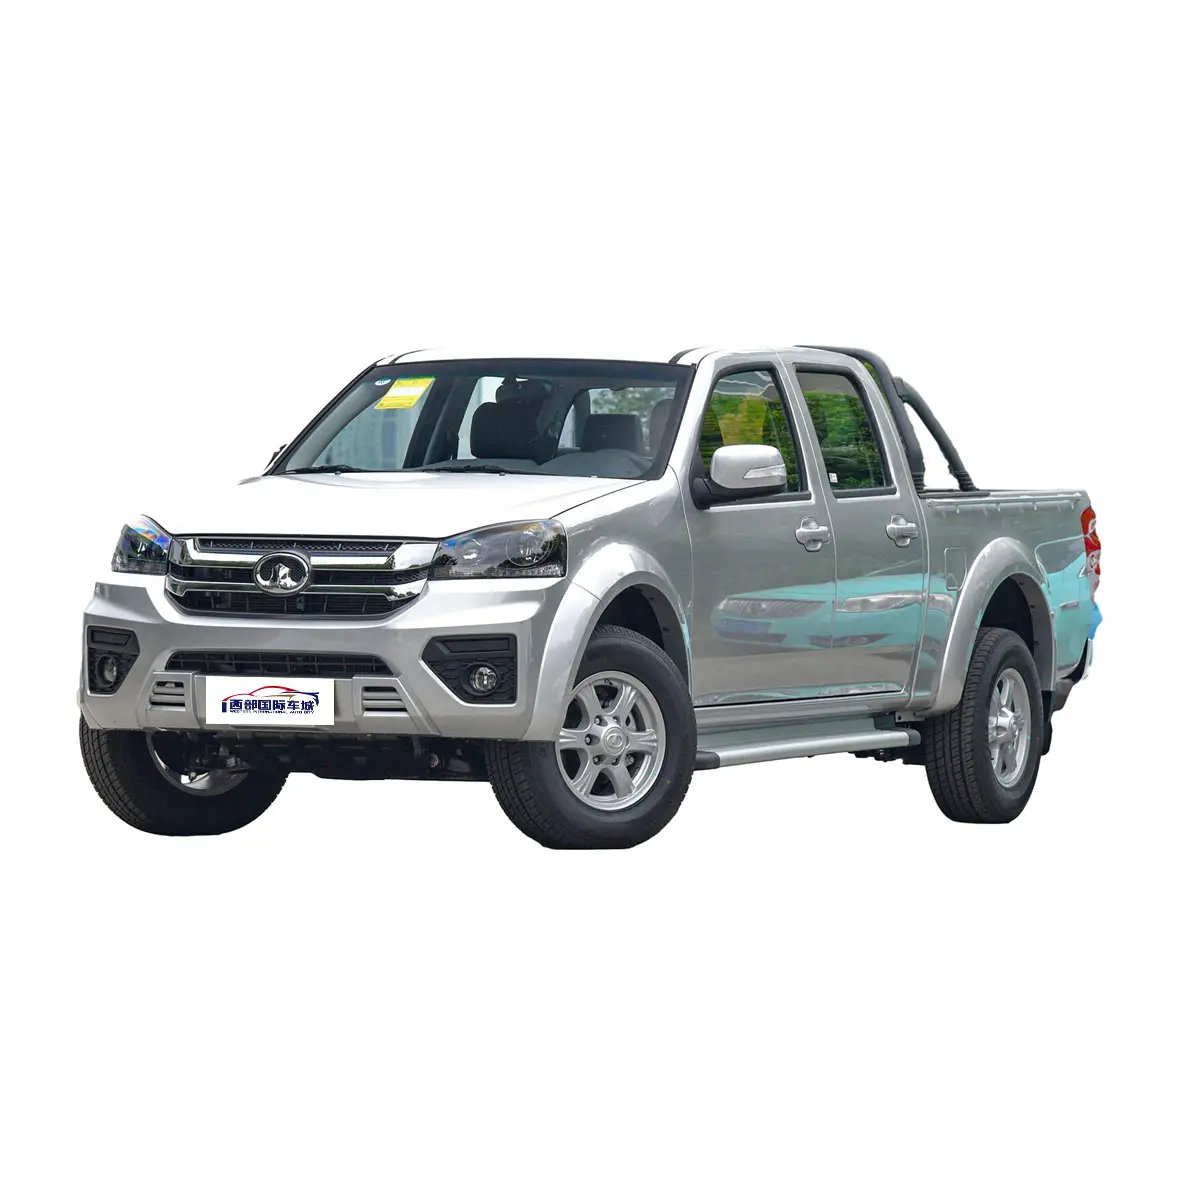 2023 Great Wall Wingle 5 Gasoline 1.5T Brand New GWM Fengjun Truck Left Steering Cheap Pickup Made in China Shop Used Cars